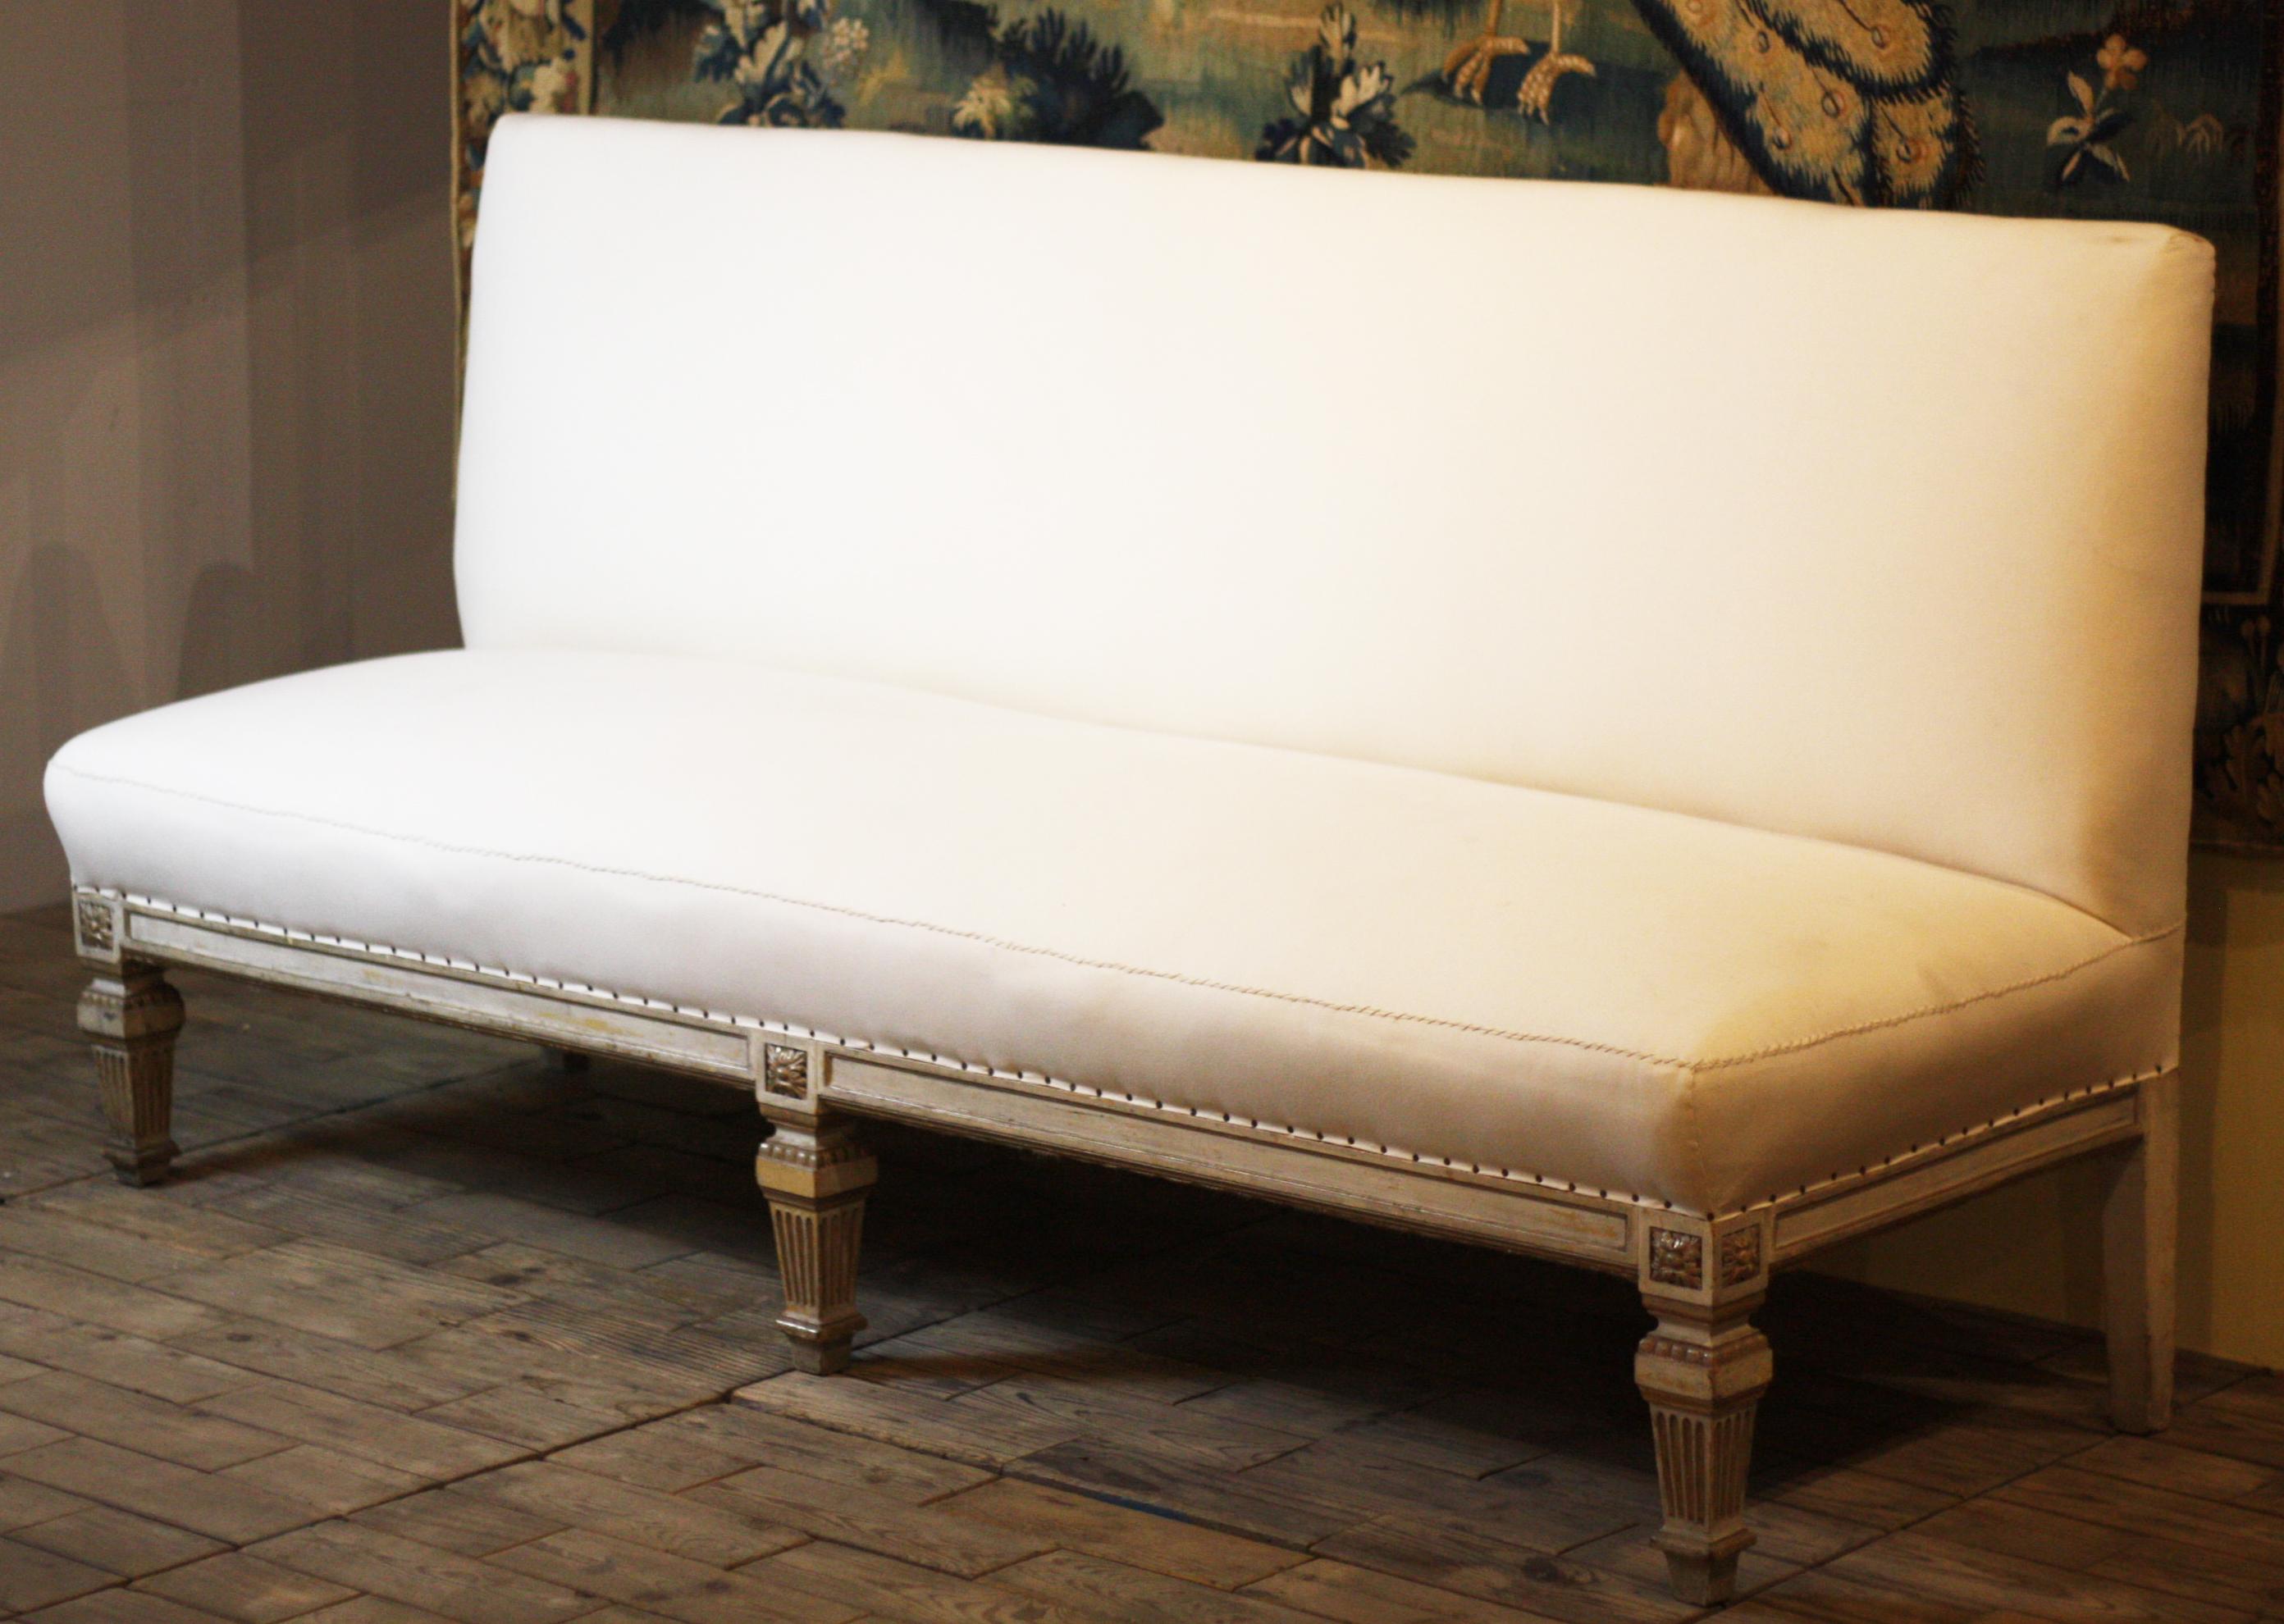 A fine pair of giltwood Louis xvi banquette canapes, carved, circa 1880, the benches are raised on six tapered legs, symmetrical carvings around the apron, and recently reupholstered in calico with decorative stitching.